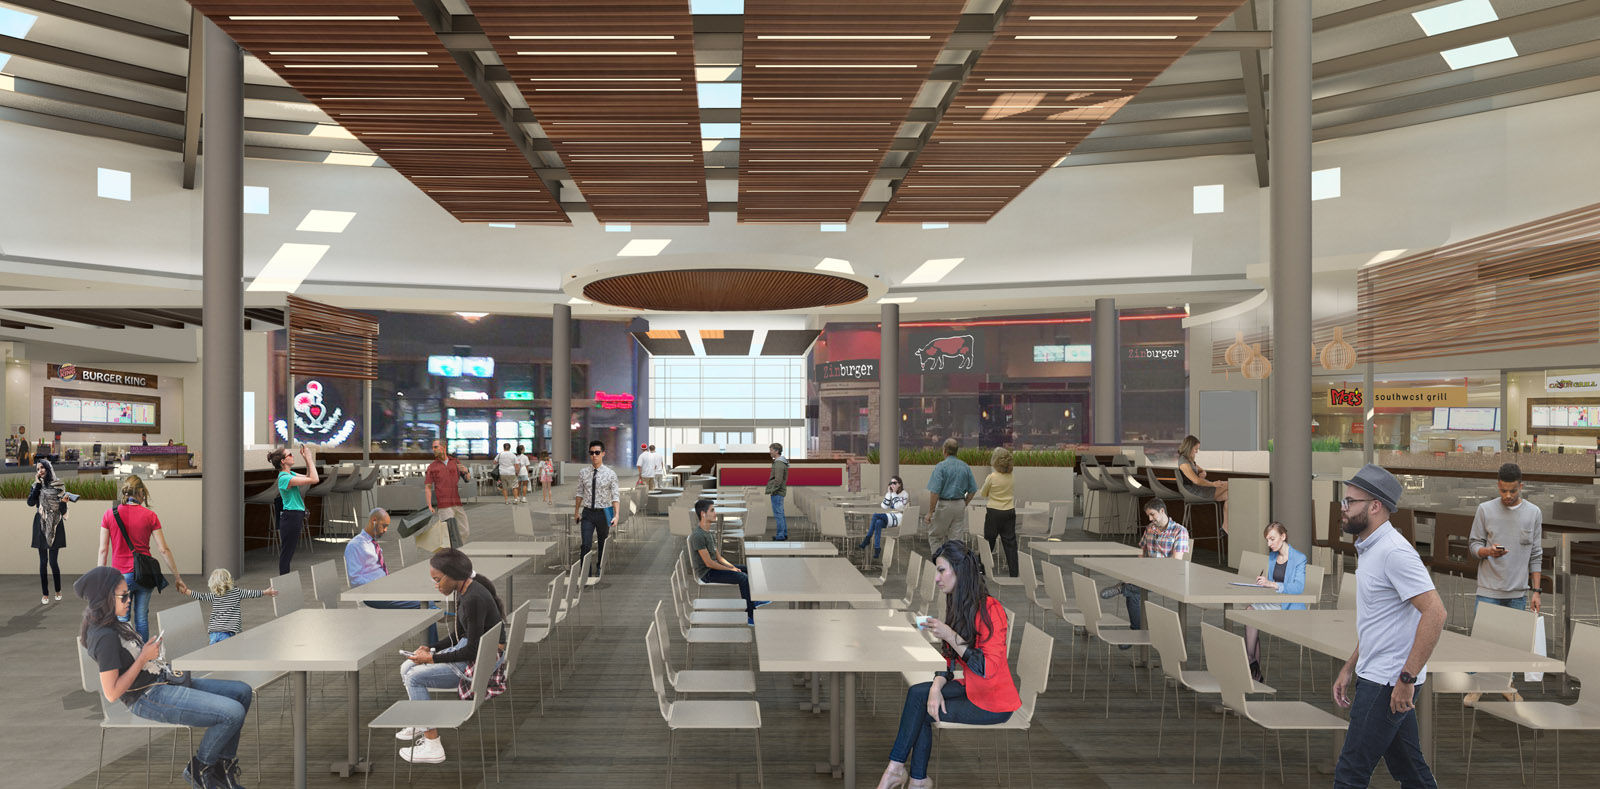 This artists rendering shows the redesigned food court at Arundel Mills. Renamed the dining pavilion, the space features a new layout, elevated banquet tables with charging stations plus conversation seating areas. New options include The Crepe Escape &amp; Creamery, Green Leafs &amp; Bananas, Suki Hana Wokaholic, Charleys Philly Steaks and Maryland’s first Zinburger Wine &amp; Burger Bar. (Courtesy Arundel Mills)